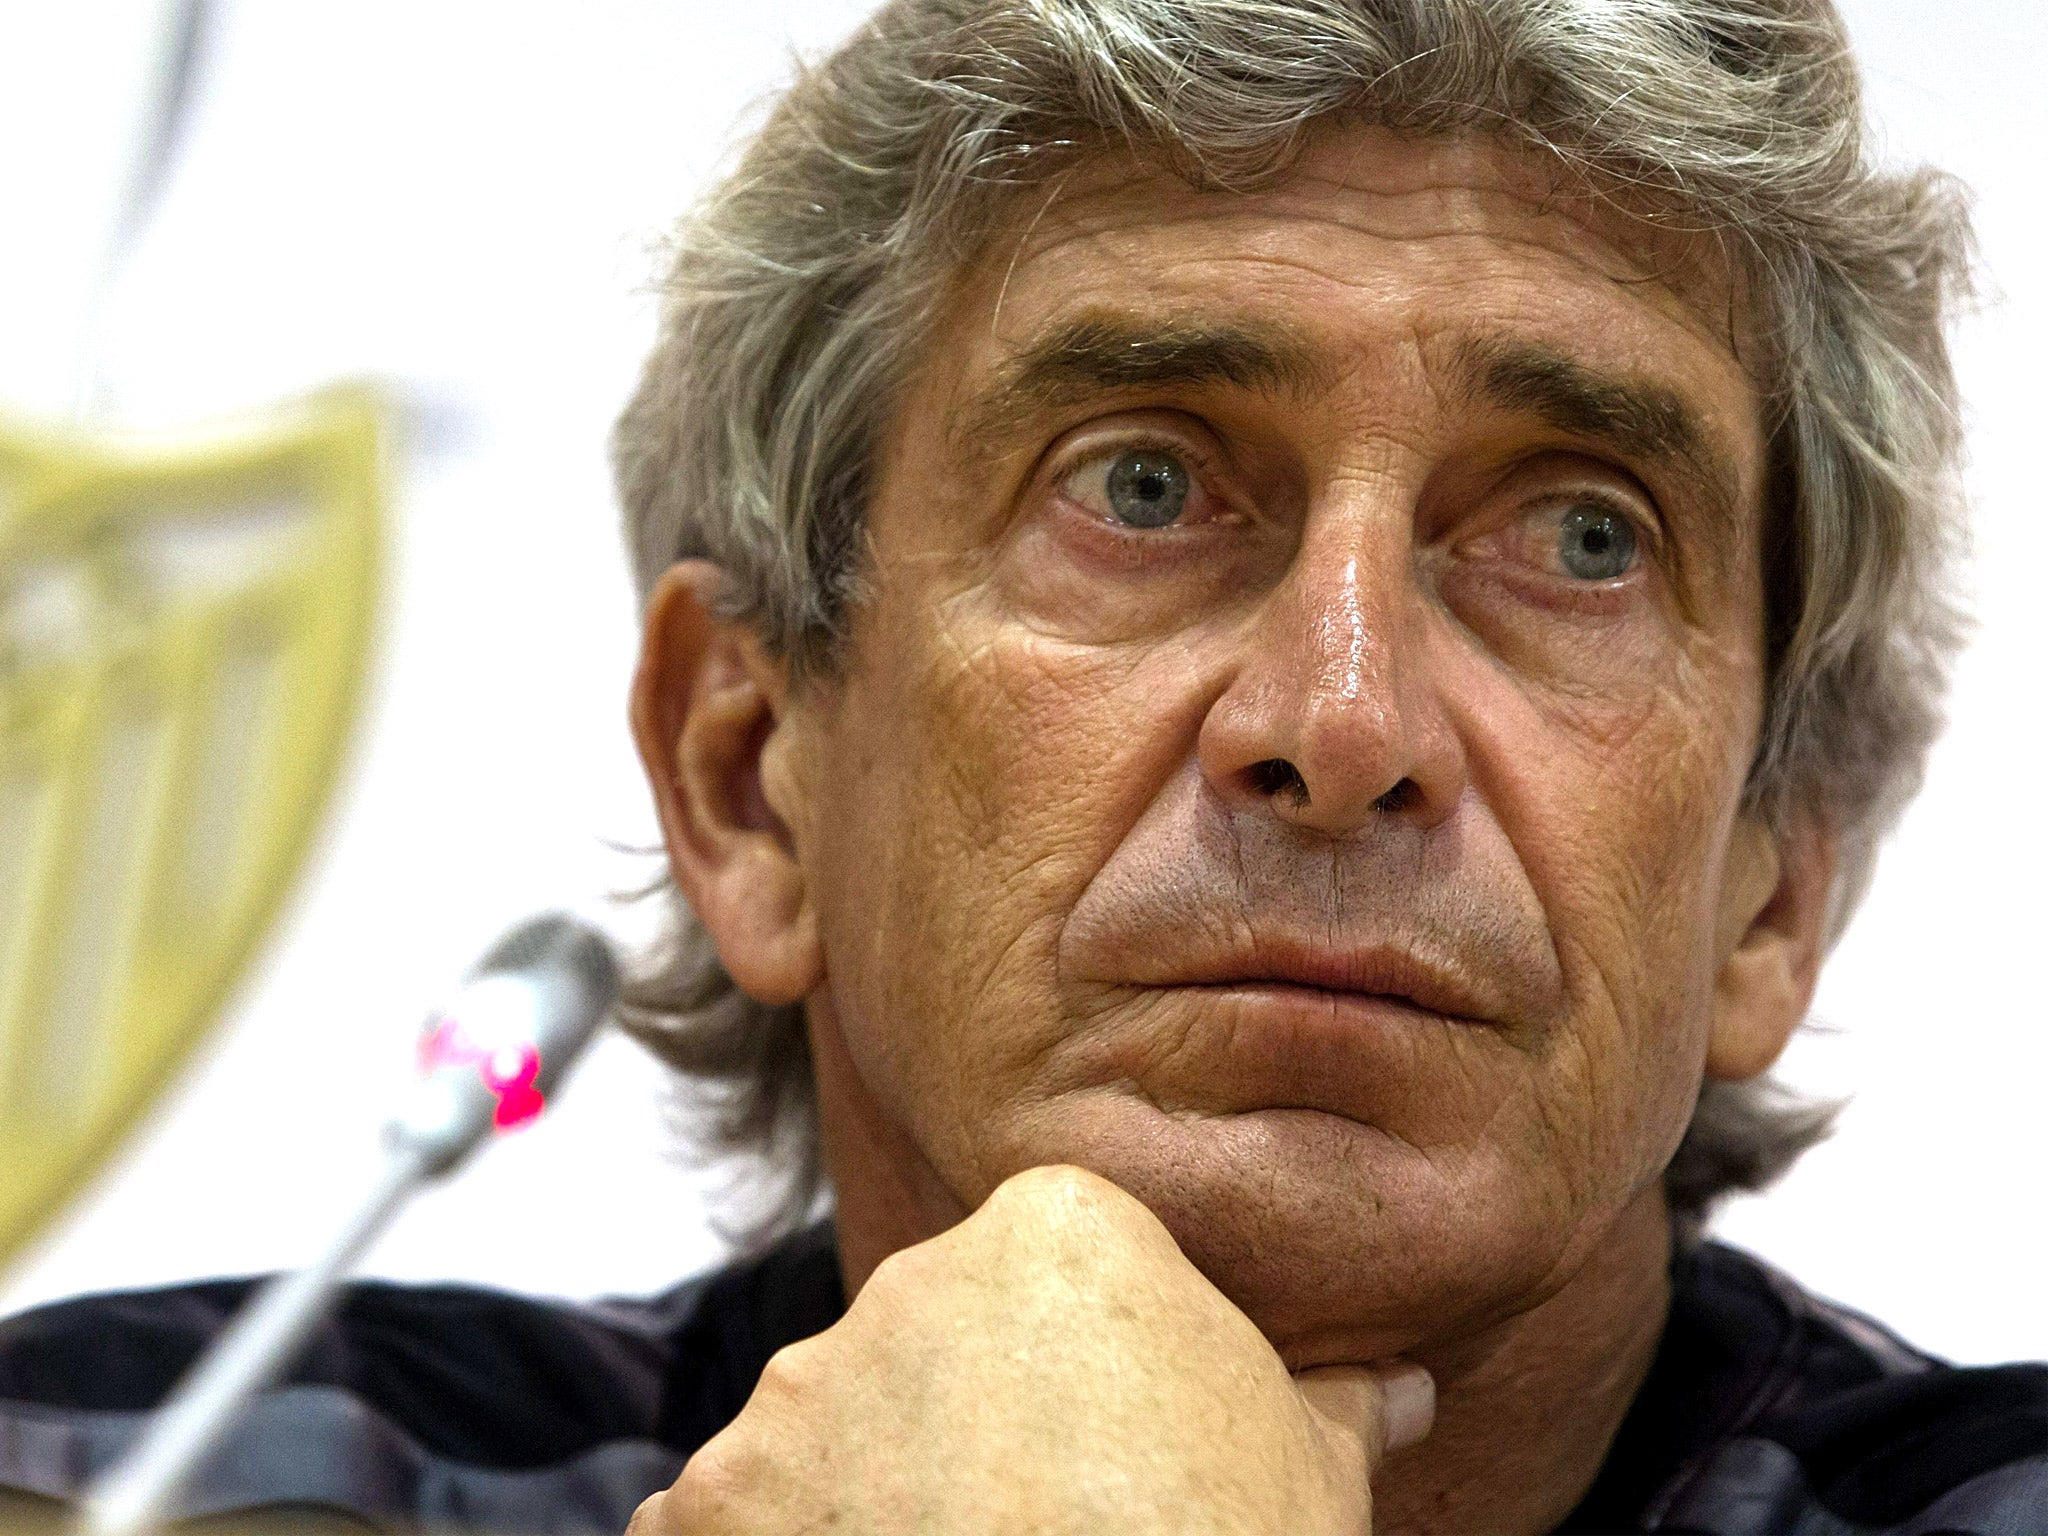 Manuel Pellegrini will start his Manchester City career in South Africa